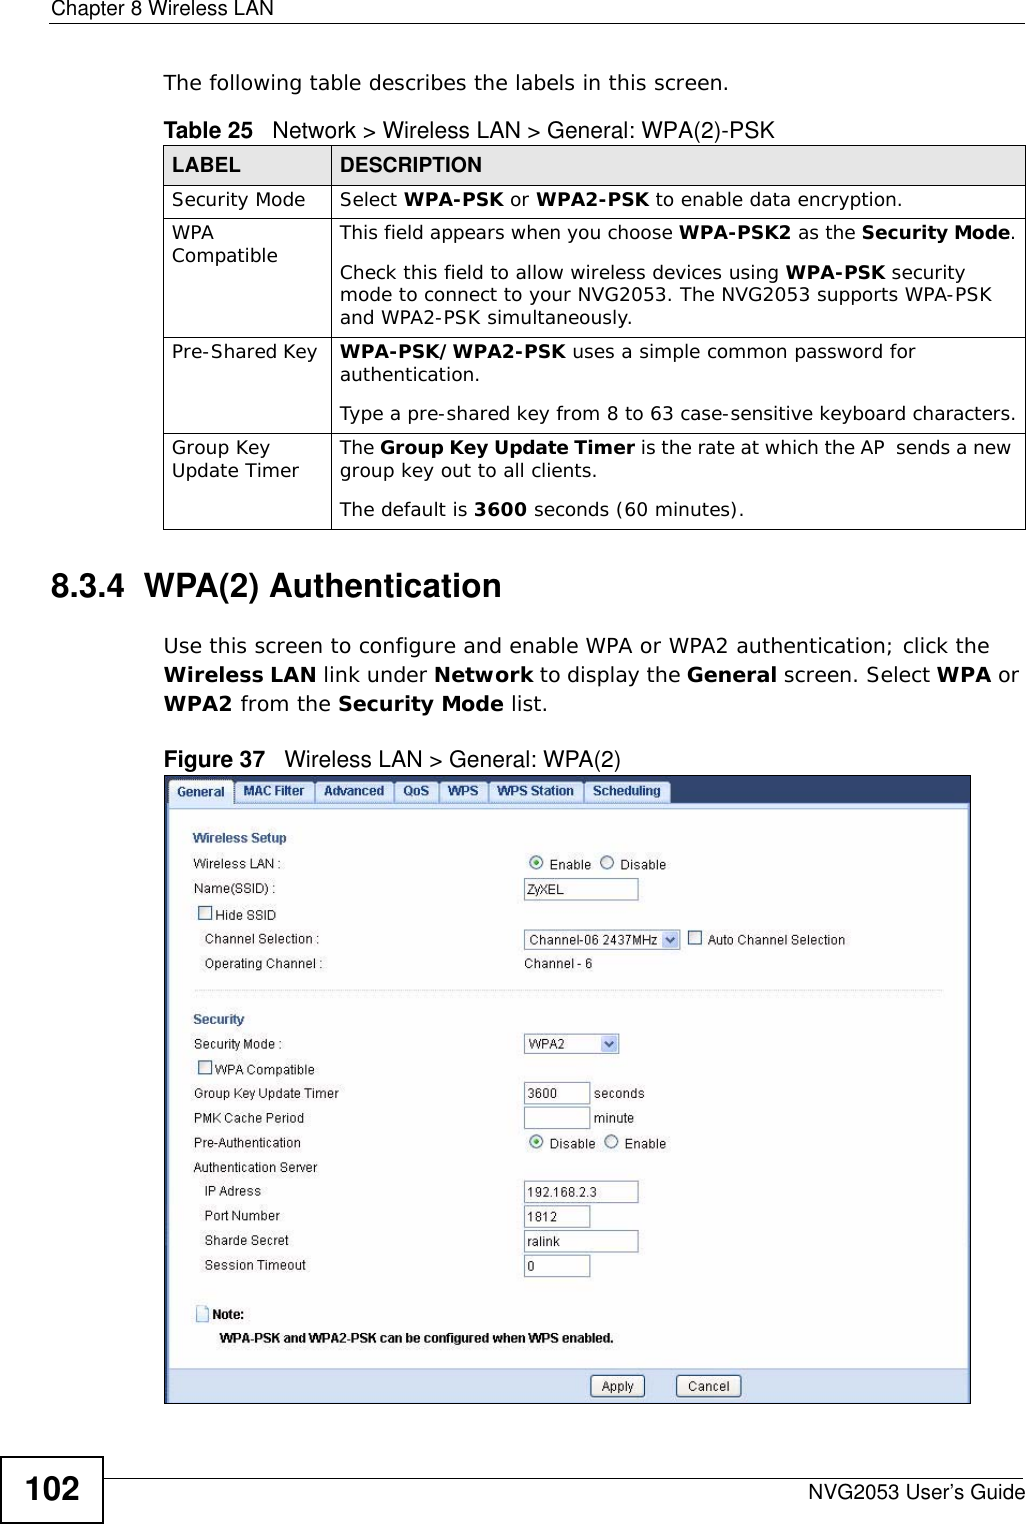 Chapter 8 Wireless LANNVG2053 User’s Guide102The following table describes the labels in this screen.8.3.4  WPA(2) AuthenticationUse this screen to configure and enable WPA or WPA2 authentication; click the Wireless LAN link under Network to display the General screen. Select WPA or WPA2 from the Security Mode list. Figure 37   Wireless LAN &gt; General: WPA(2)Table 25   Network &gt; Wireless LAN &gt; General: WPA(2)-PSKLABEL DESCRIPTIONSecurity Mode Select WPA-PSK or WPA2-PSK to enable data encryption.WPA Compatible This field appears when you choose WPA-PSK2 as the Security Mode.Check this field to allow wireless devices using WPA-PSK security mode to connect to your NVG2053. The NVG2053 supports WPA-PSK and WPA2-PSK simultaneously.Pre-Shared Key  WPA-PSK/WPA2-PSK uses a simple common password for authentication.Type a pre-shared key from 8 to 63 case-sensitive keyboard characters.Group Key Update Timer The Group Key Update Timer is the rate at which the AP  sends a new group key out to all clients. The default is 3600 seconds (60 minutes).